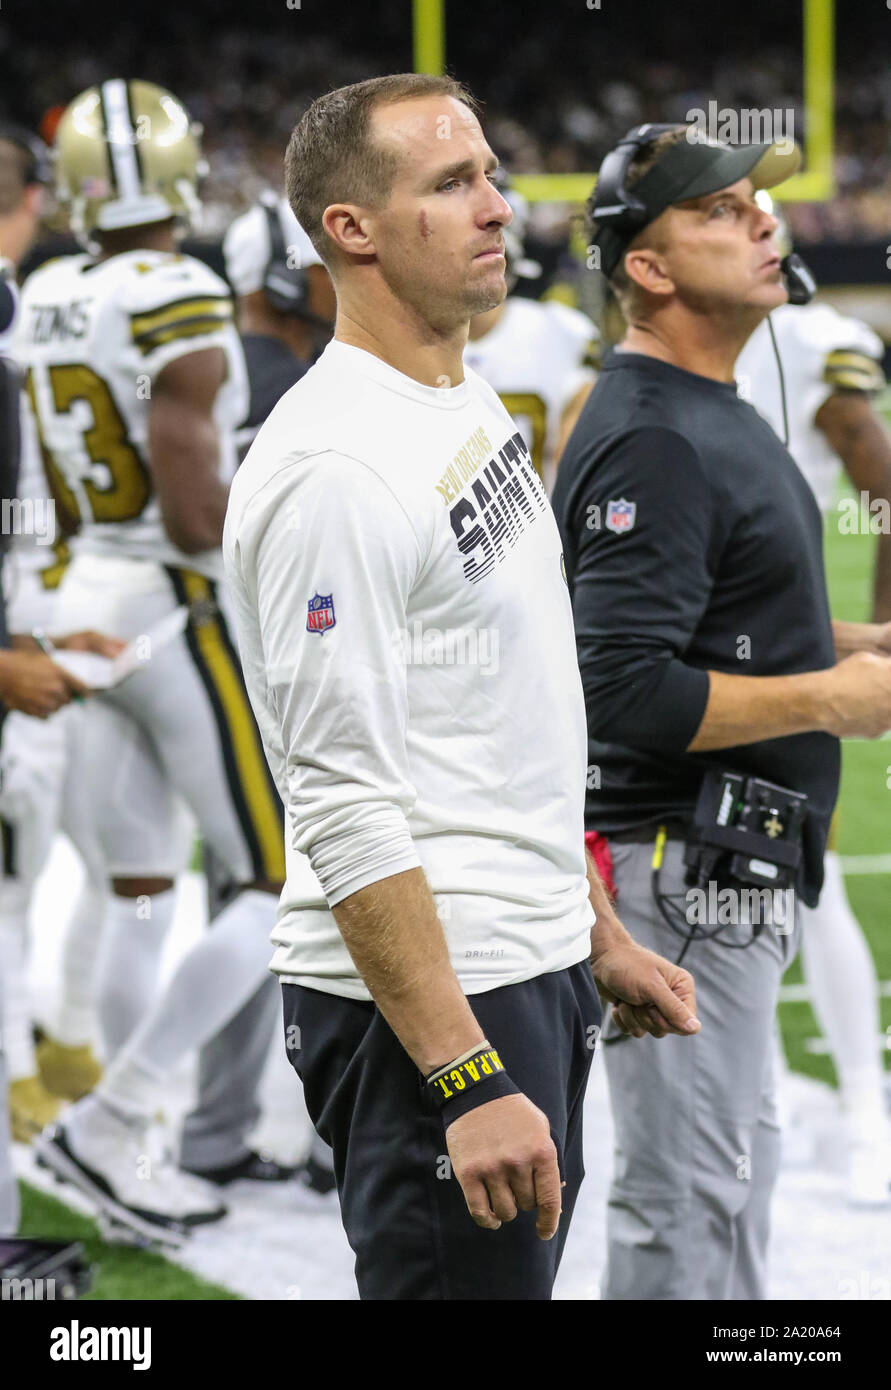 New Orleans, LA, USA. 29th Sep, 2019. New Orleans Saints injured quarterback Drew Brees watches the game as Head Coach Sean Payton looks to call the next play during NFL game action between the New Orleans Saints and the Dallas Cowboys at the Mercedes Benz Superdome in New Orleans, LA. Jonathan Mailhes/CSM/Alamy Live News Stock Photo